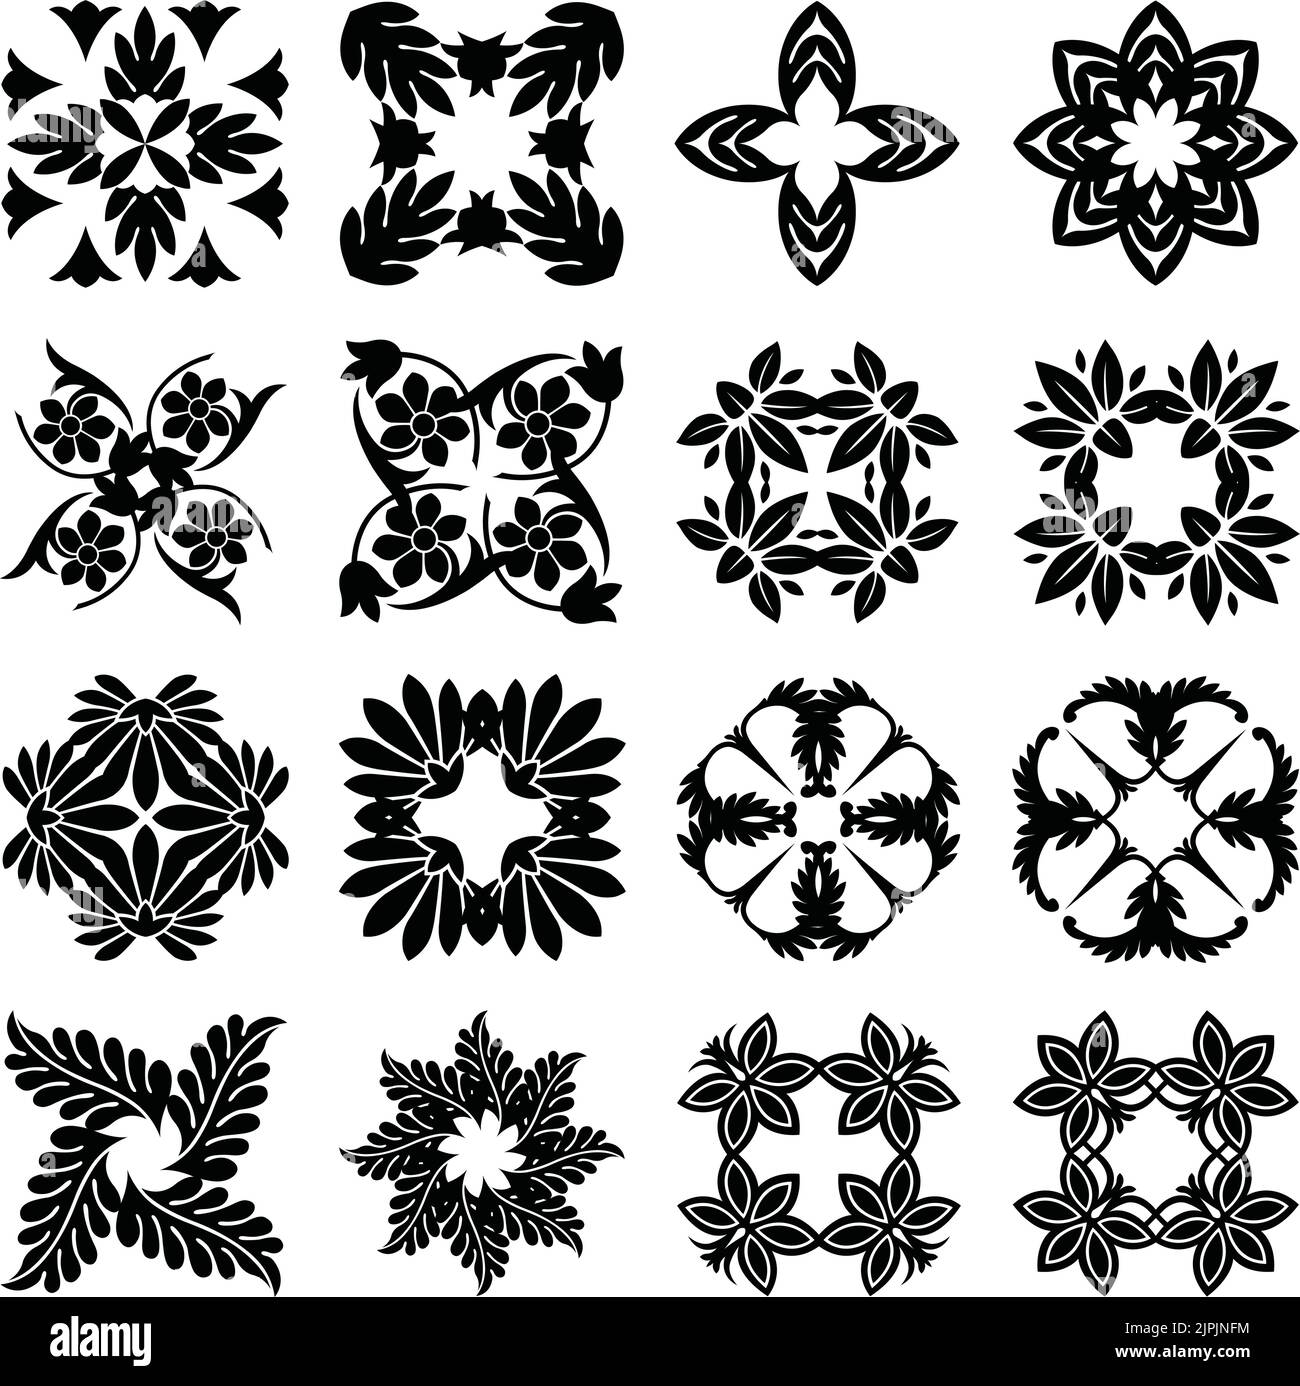 A set of vintage vector decorative east indian style floral icons. Stock Vector